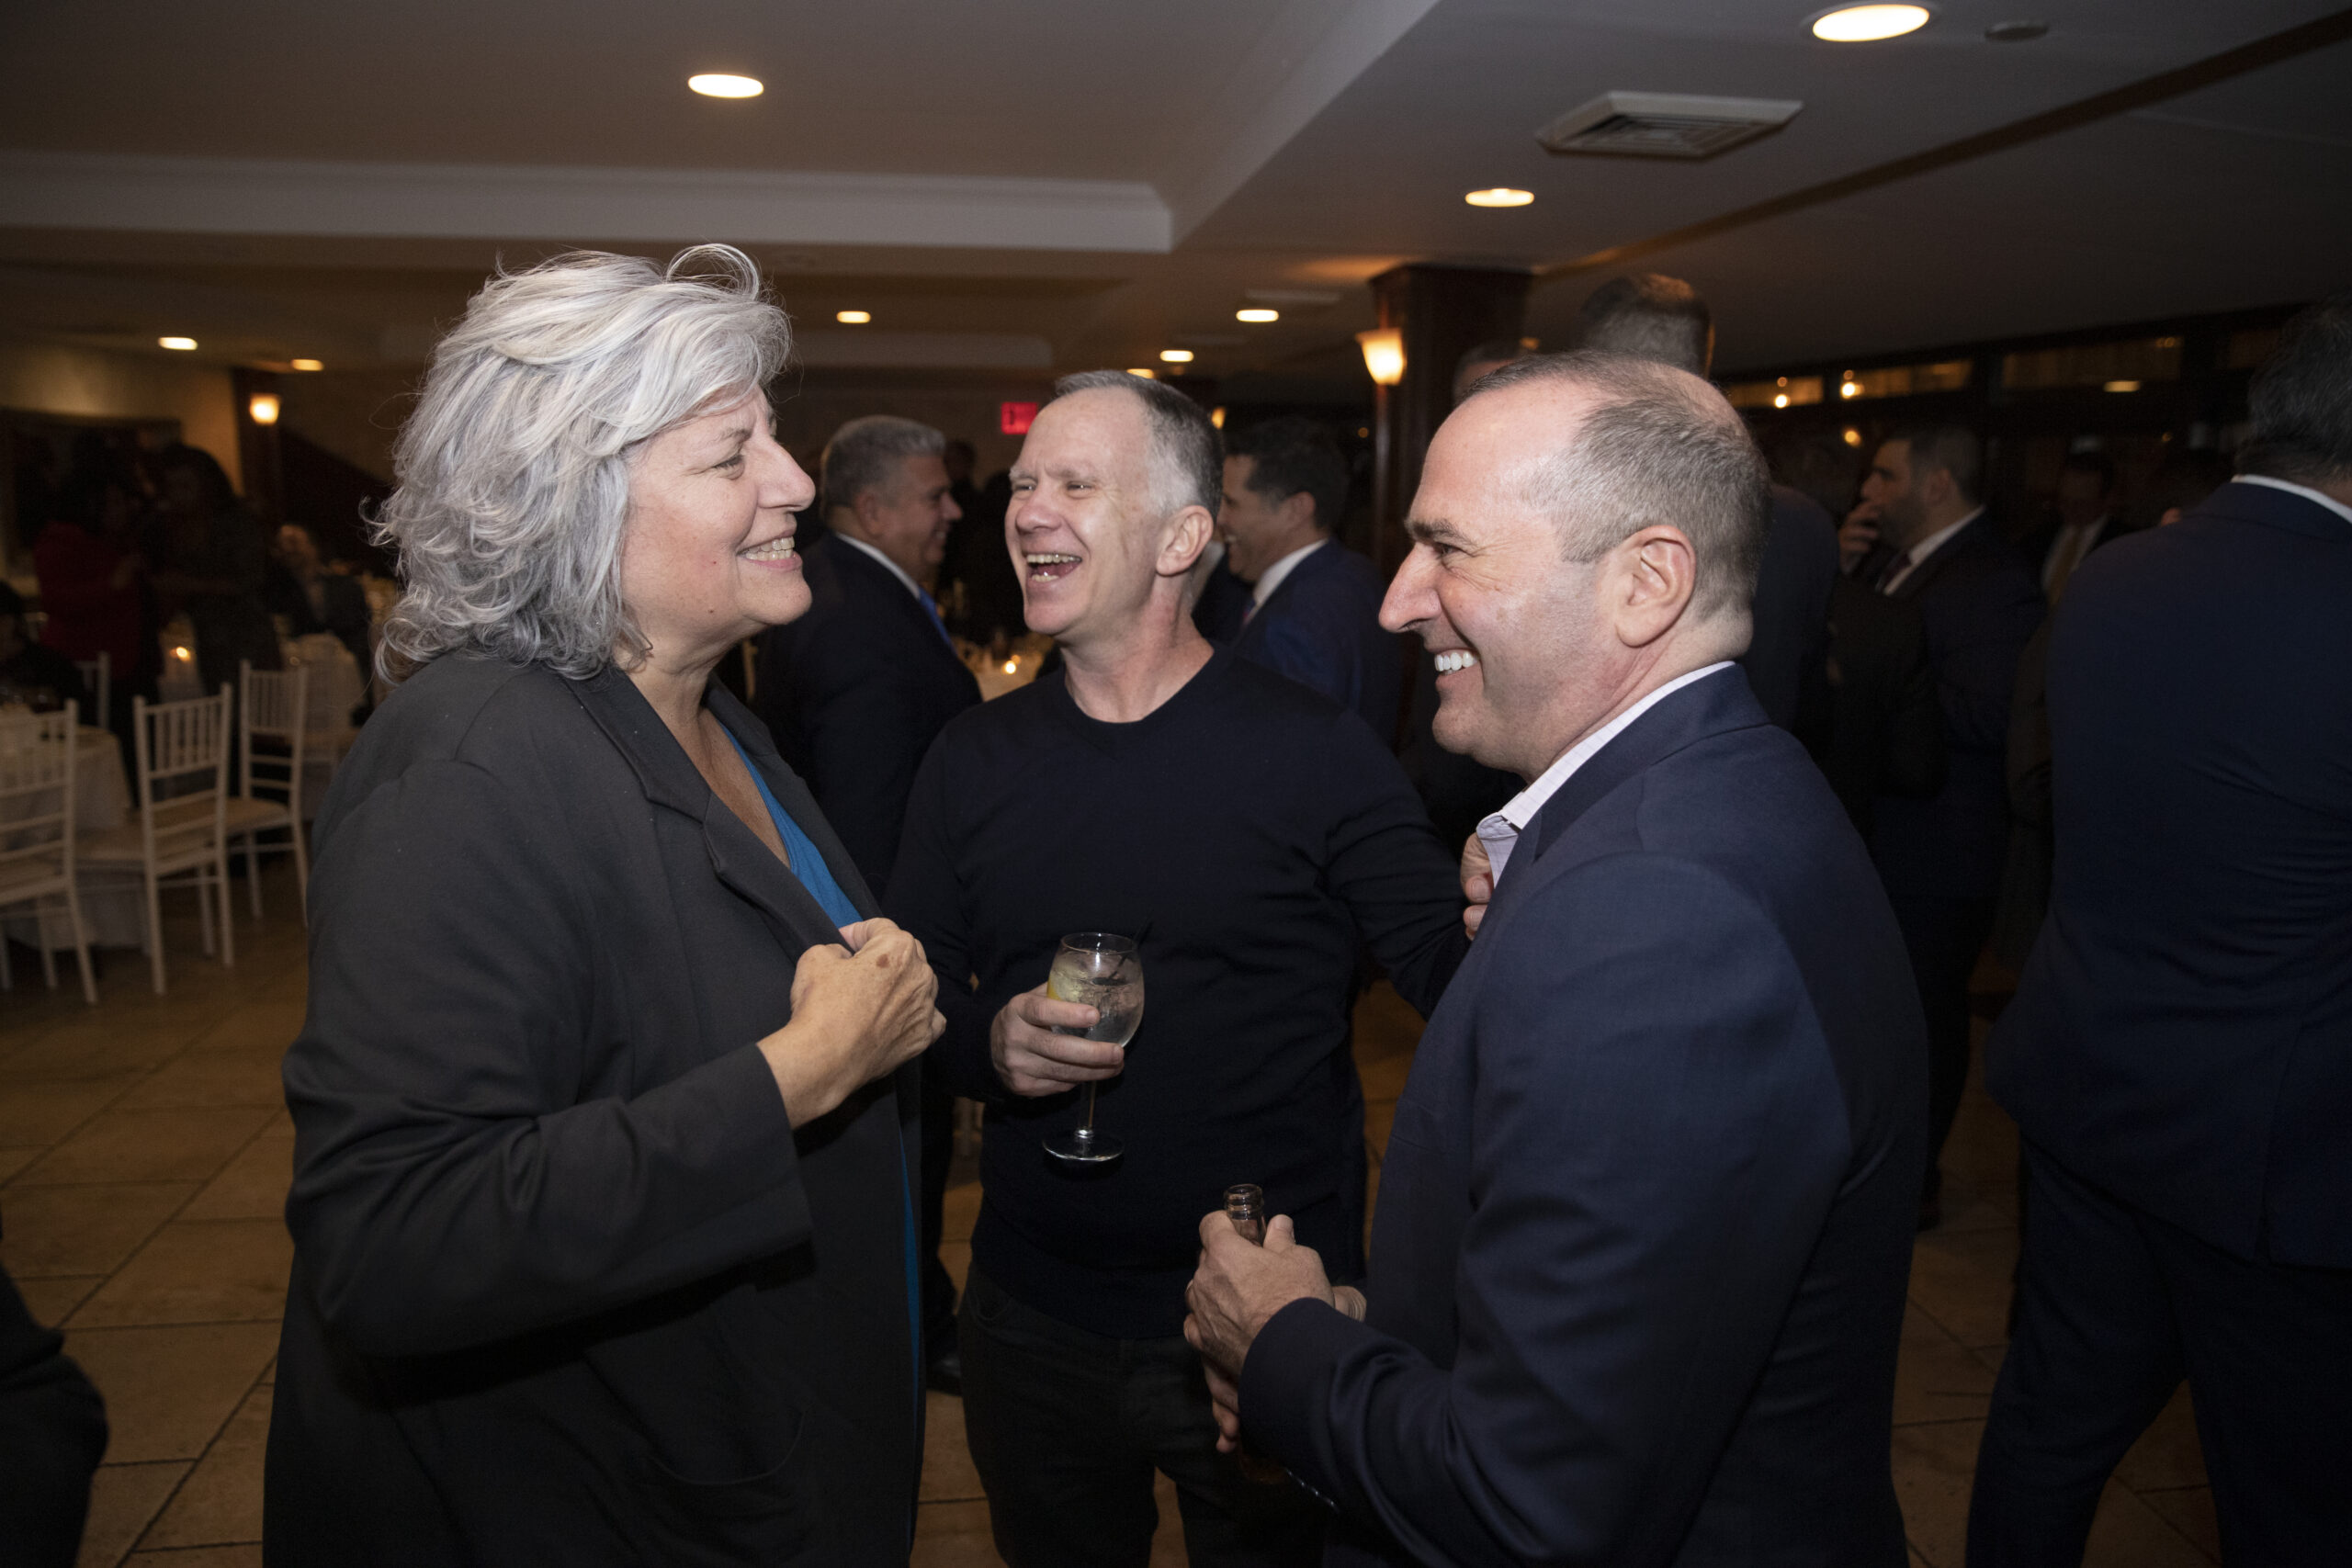 Lisa Schreibersdorf, executive director of the Brooklyn Defender Services, with past presidents Christopher Wright and Andrew Rendeiro (right) at KCCBA Dinner.